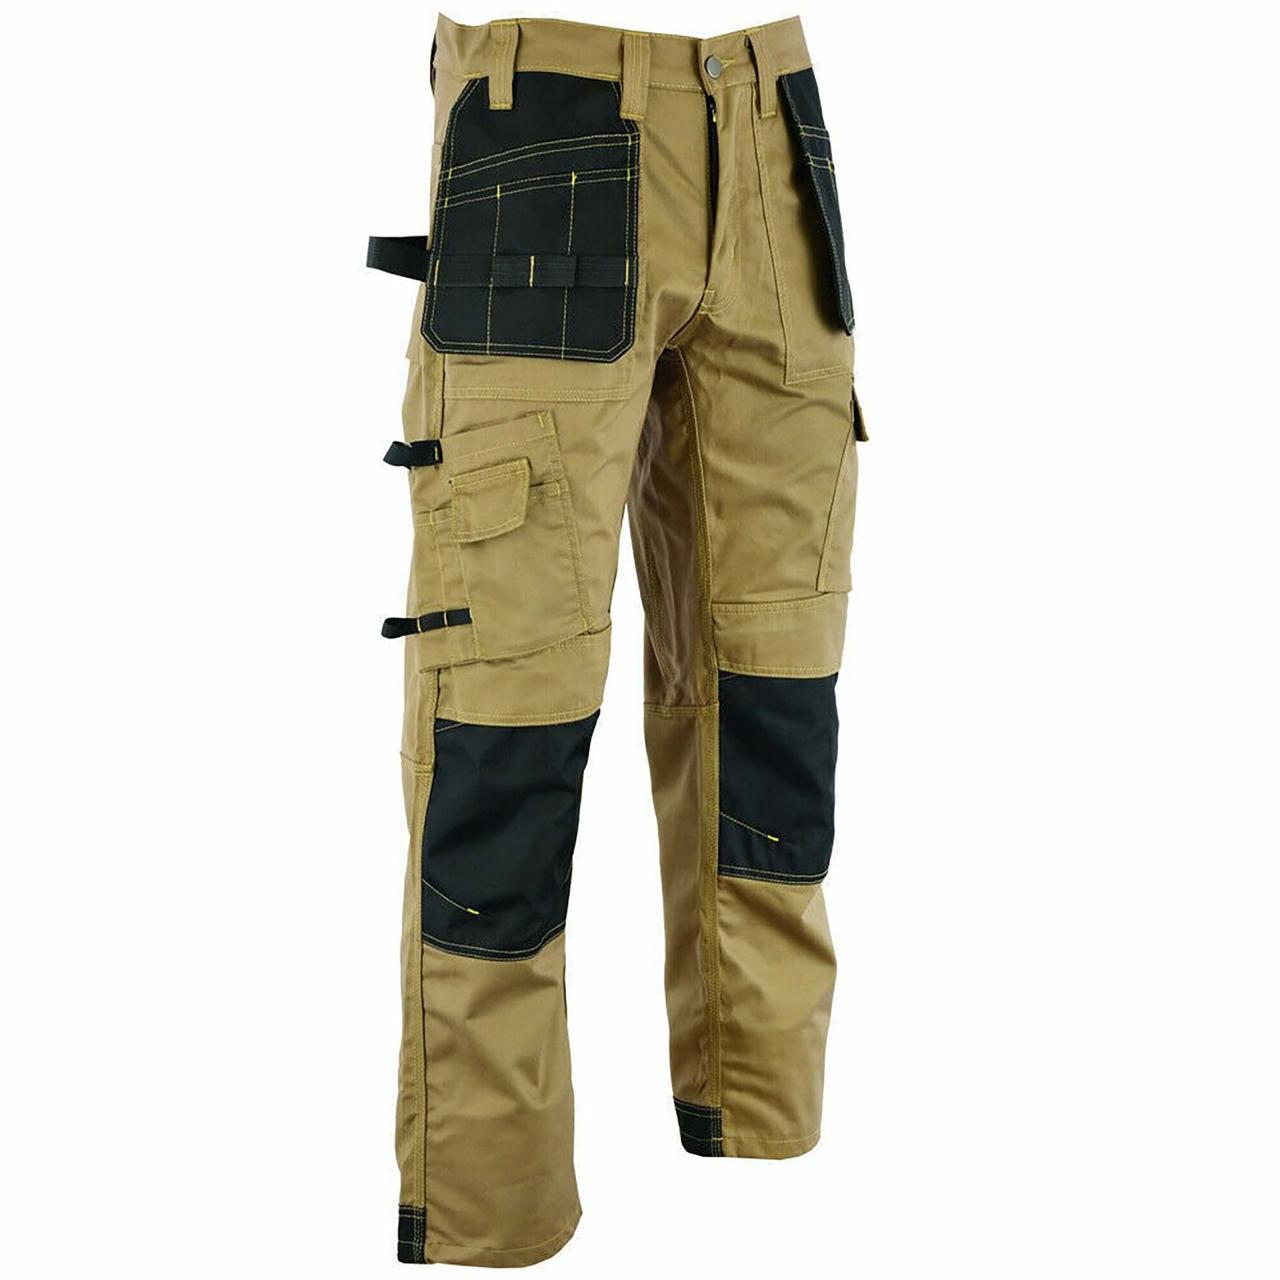 Urban Tactical Cargo Work Pants for Men - Heavy-Duty Knee Pads and Multiple Pockets